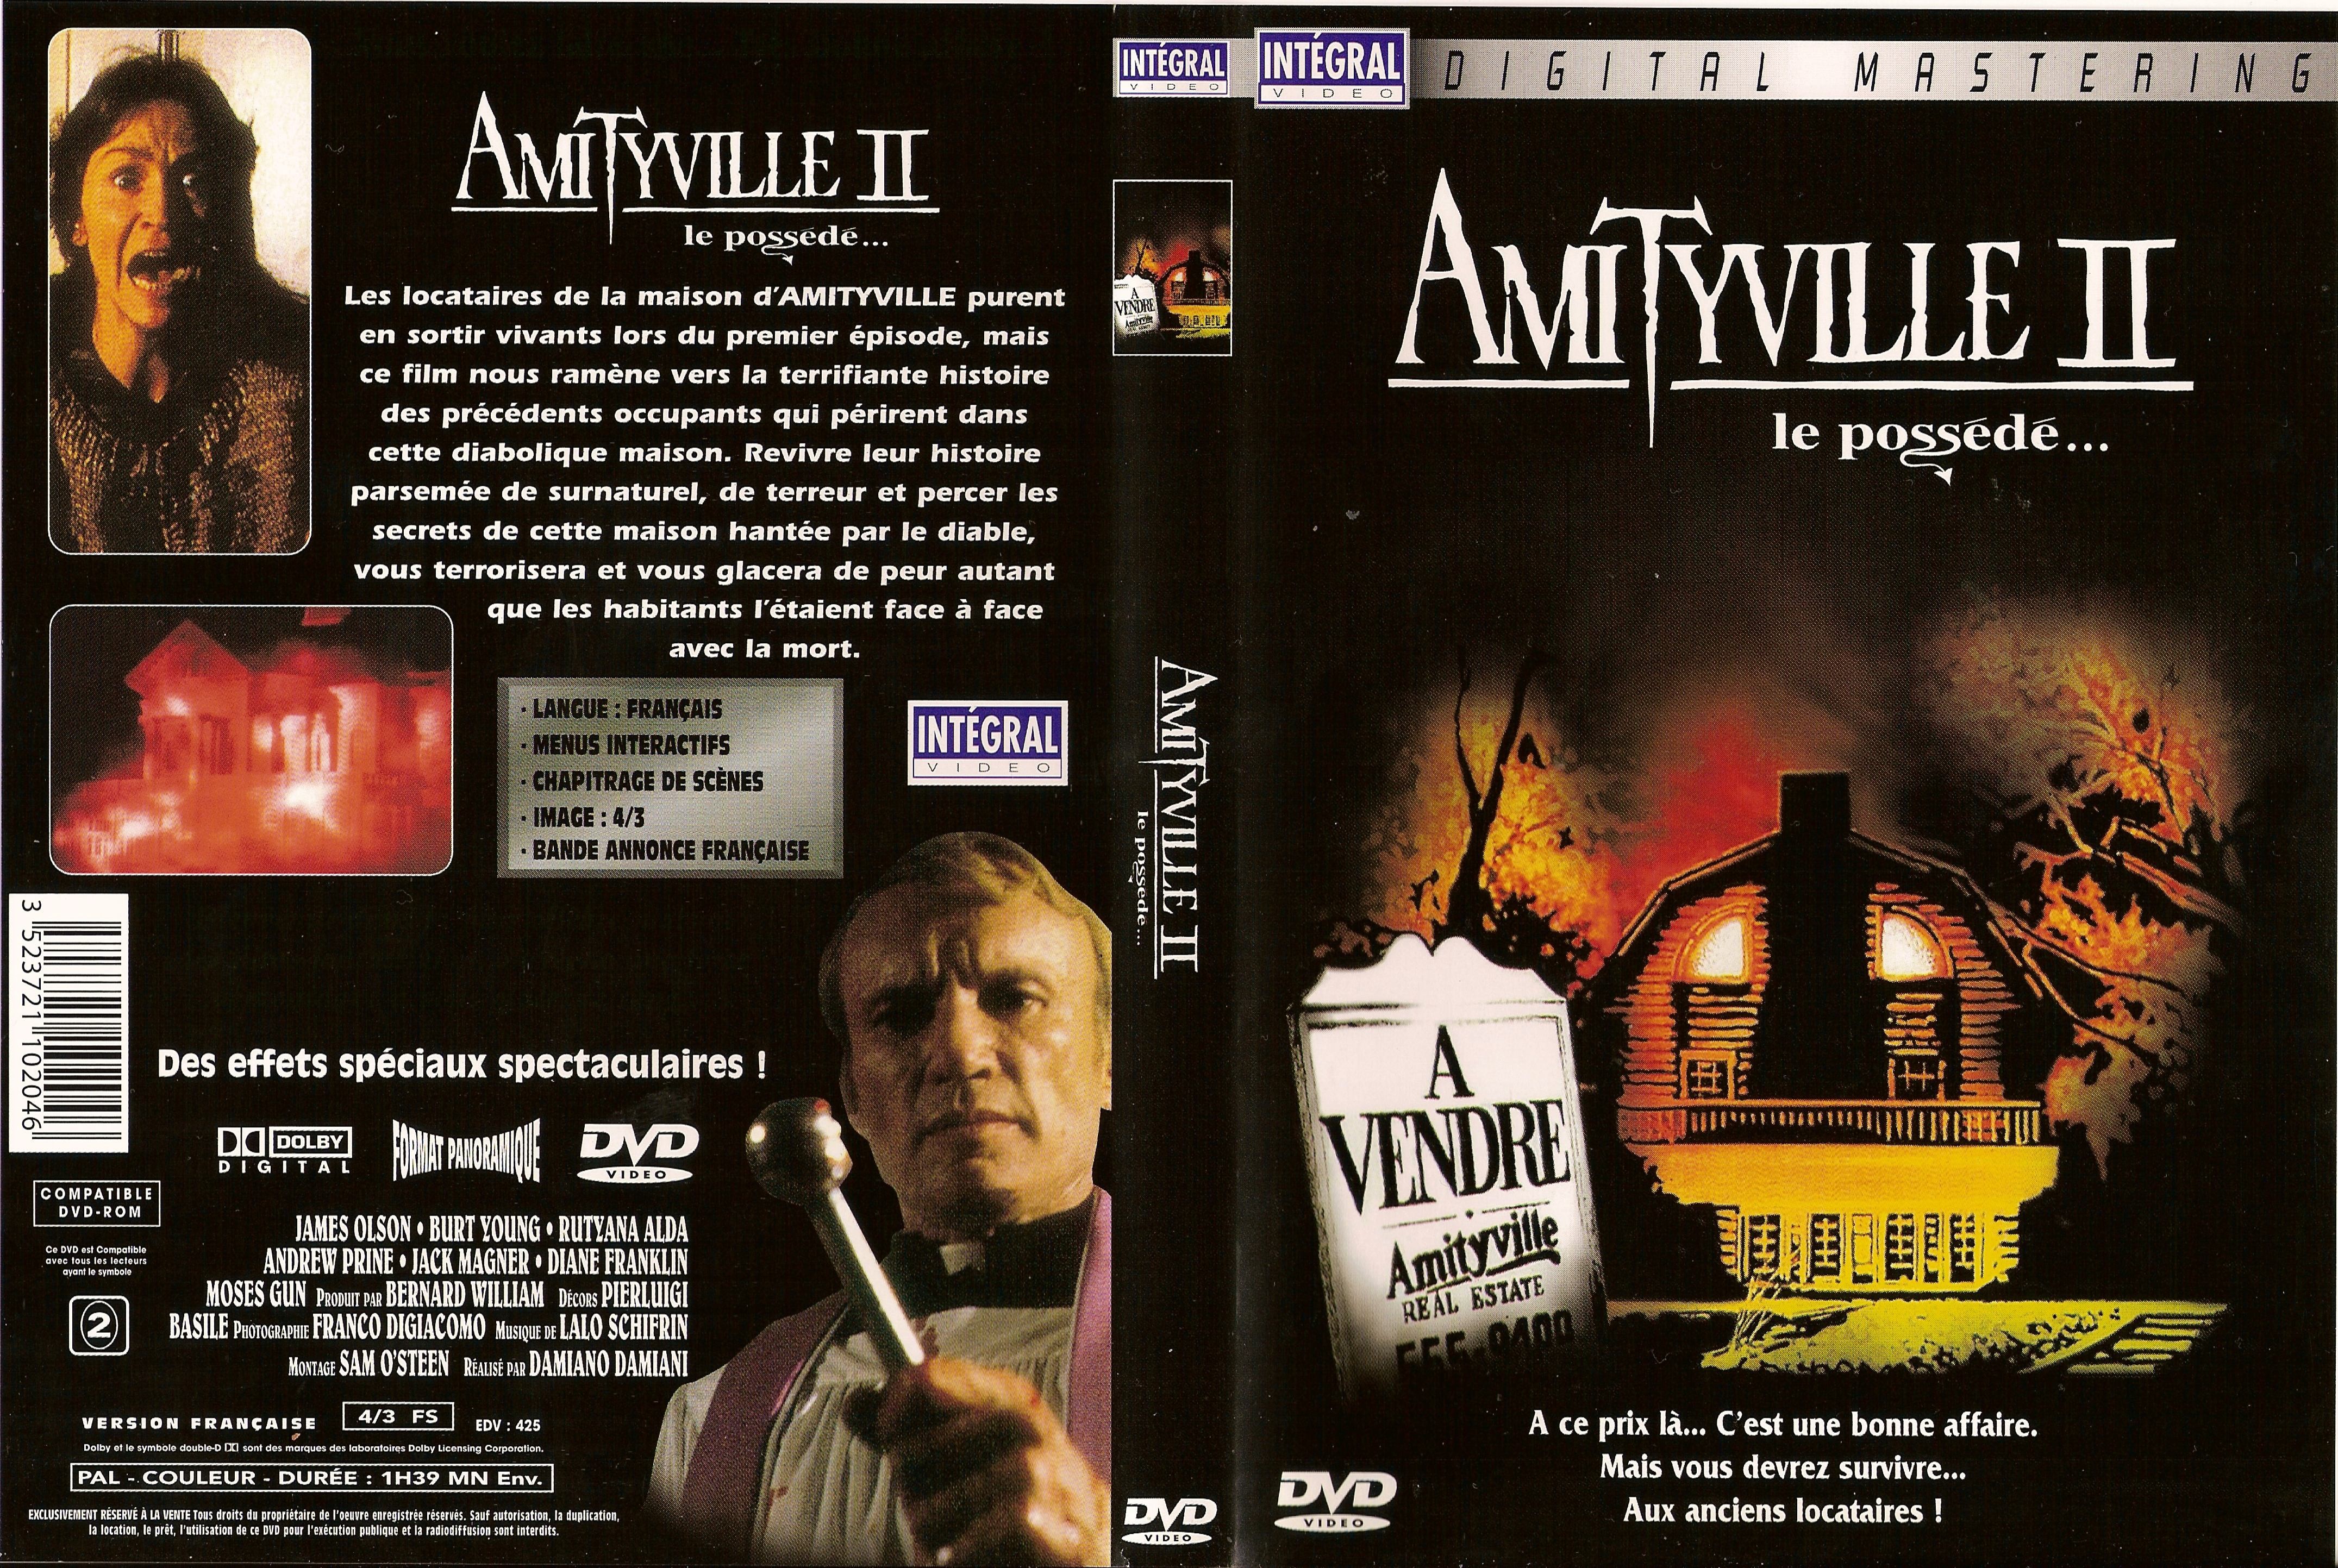 Jaquette DVD Amityville 2